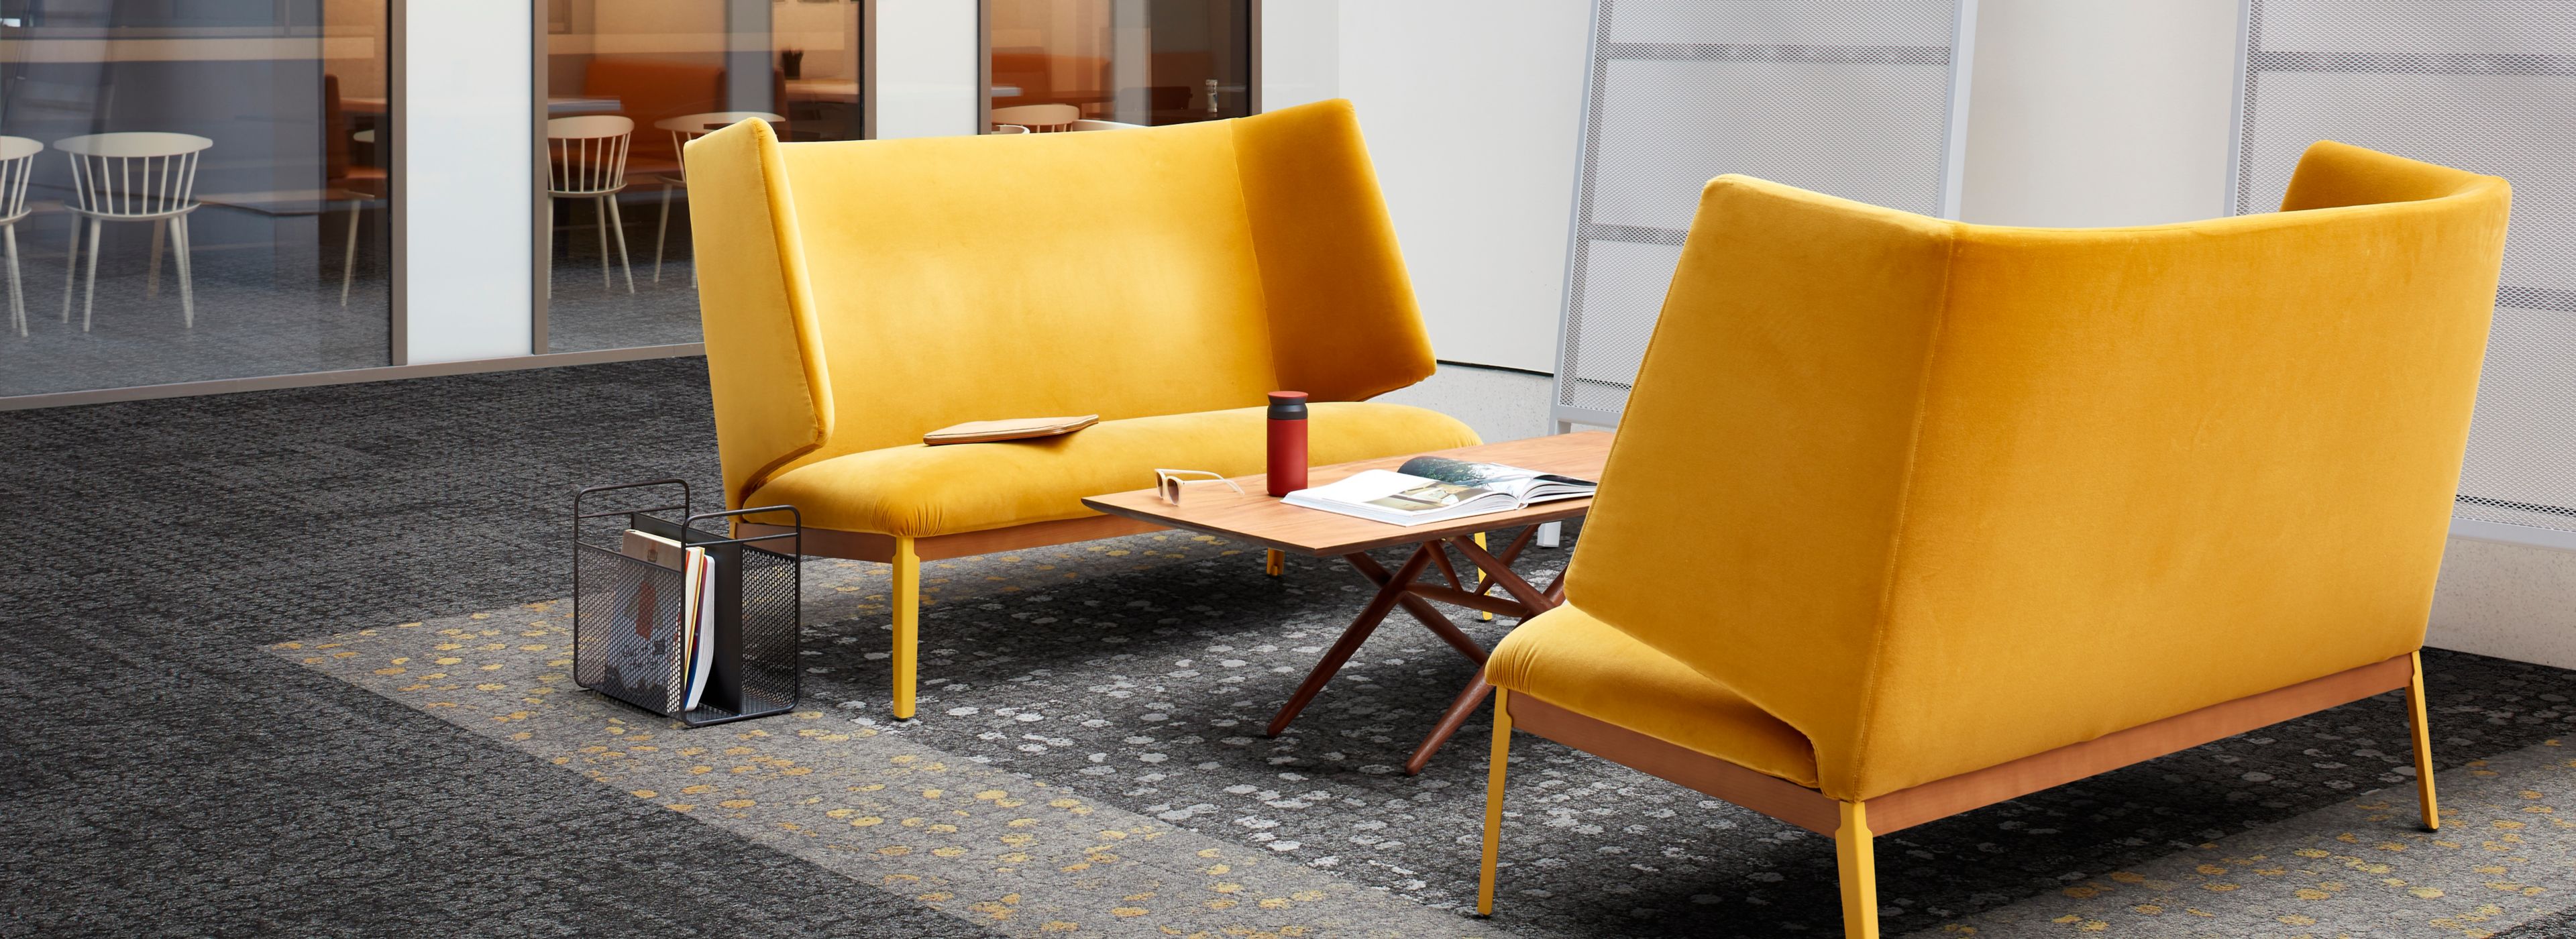 Interface Mercer Street and Broome Street carpet tile in seating area with two yellow couches numéro d’image 1